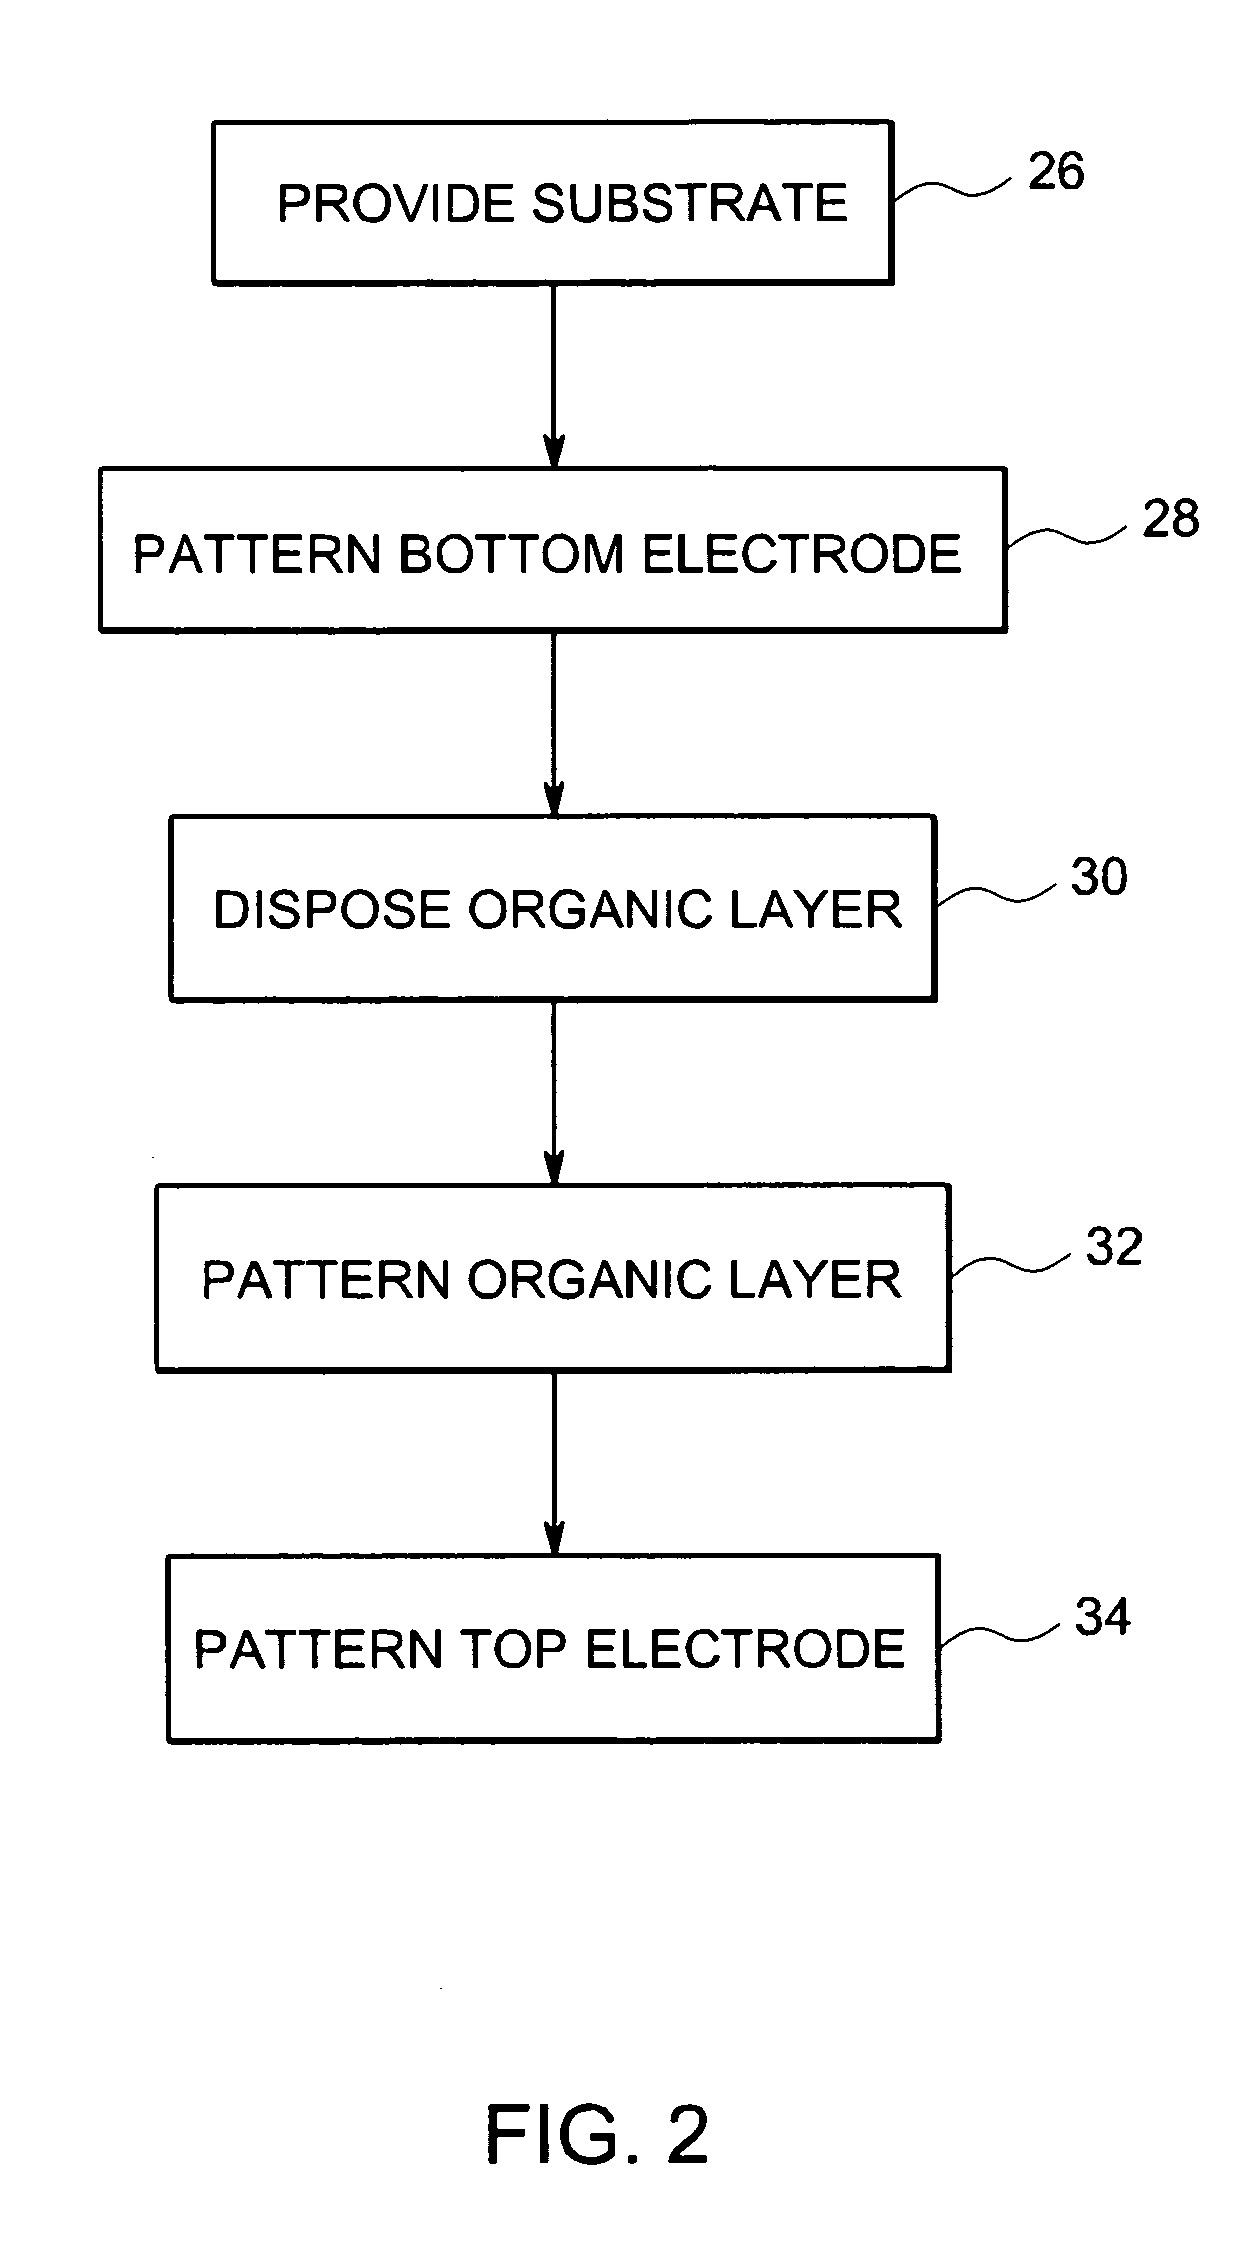 Full fault tolerant architecture for organic electronic devices